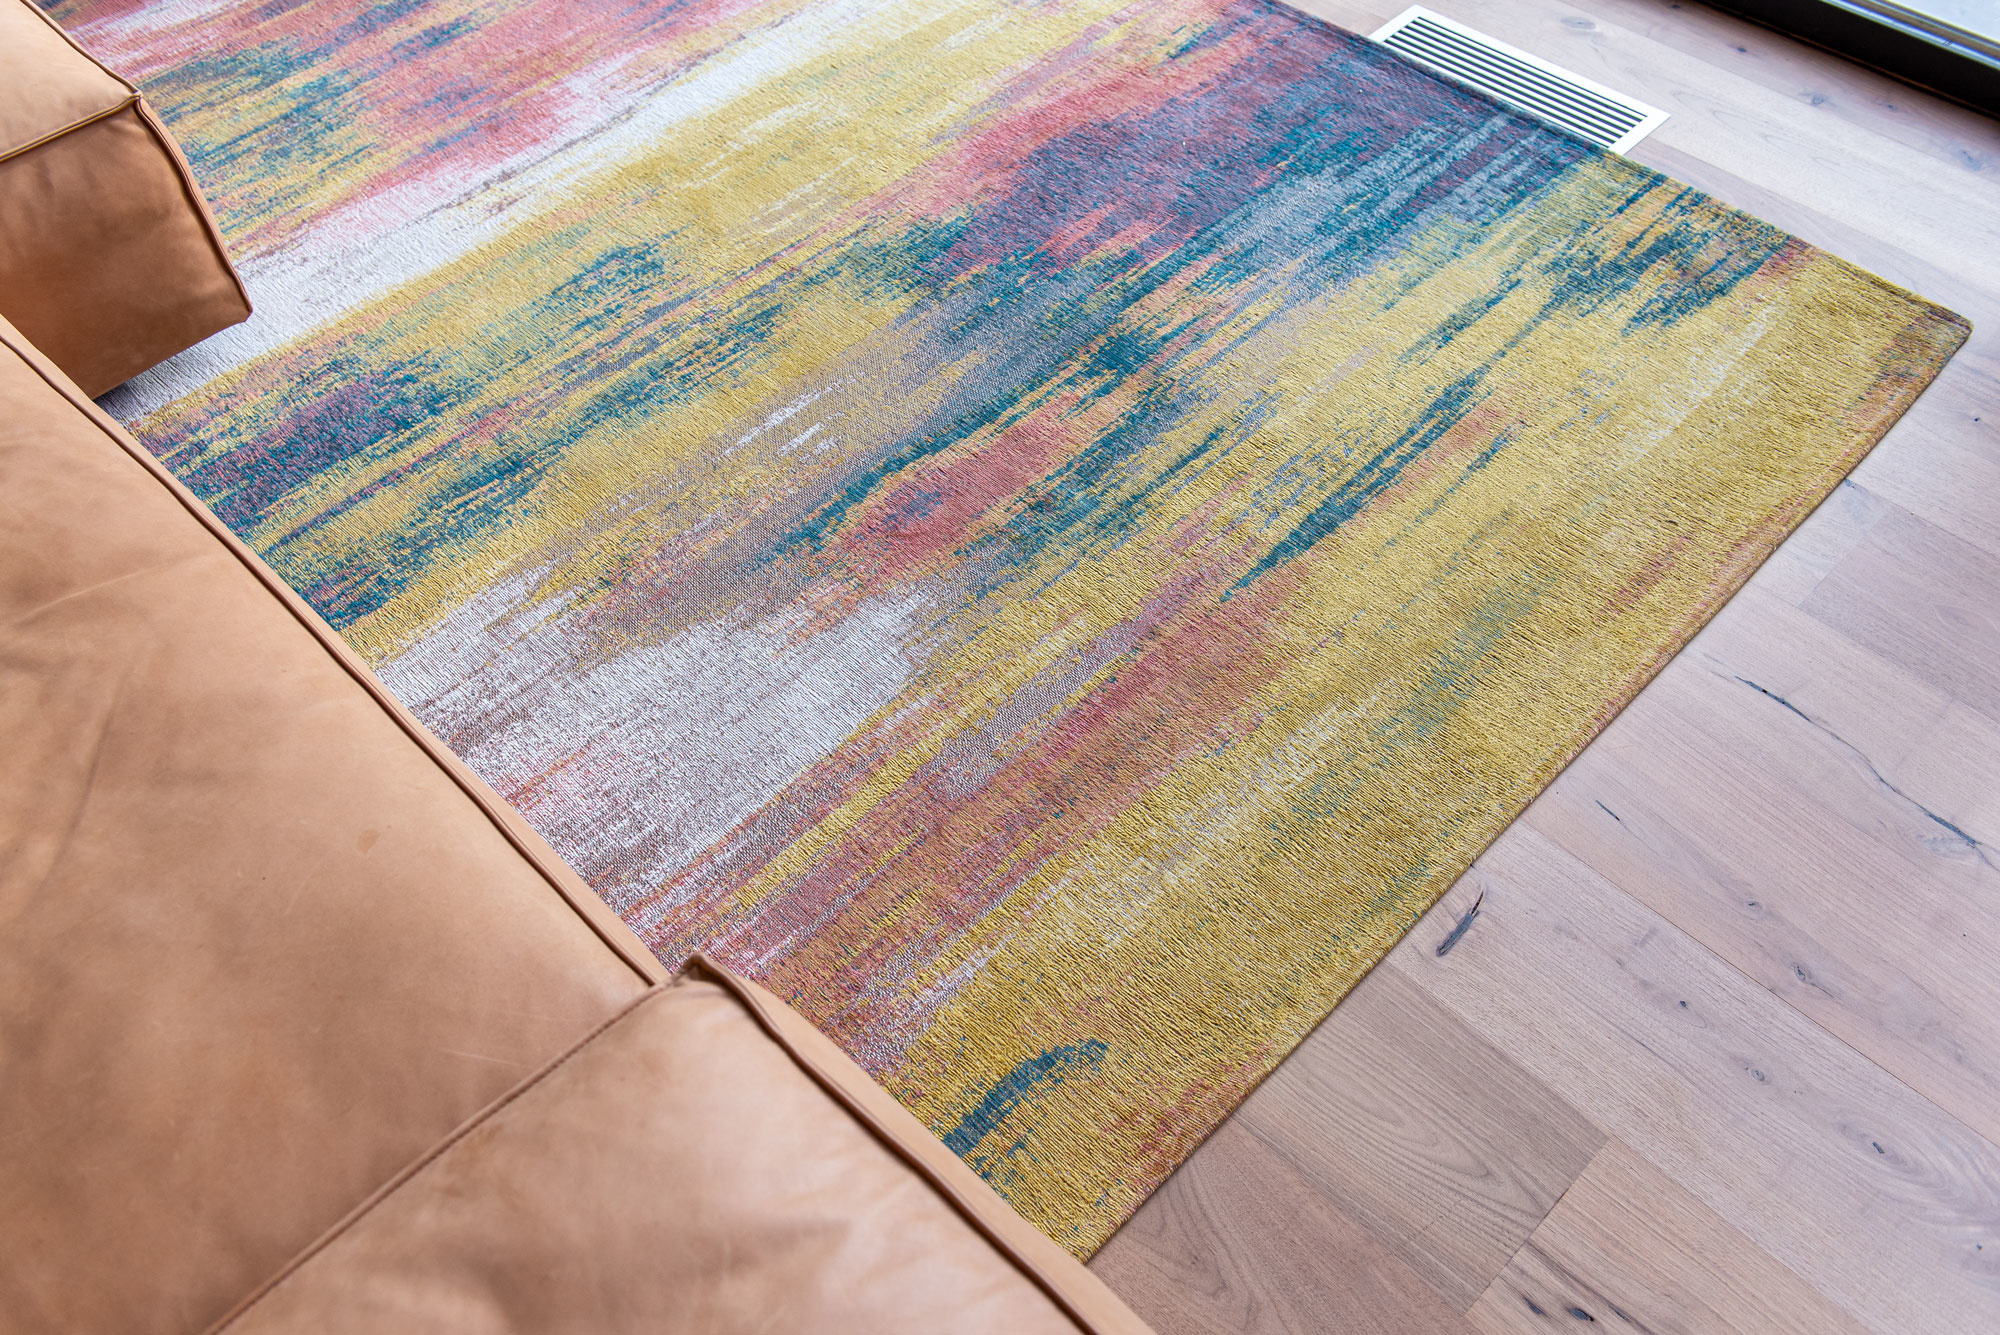 Abstract Flatwoven Mix Rug ☞ Size: 9' 2" x 12' (280 x 360 cm)